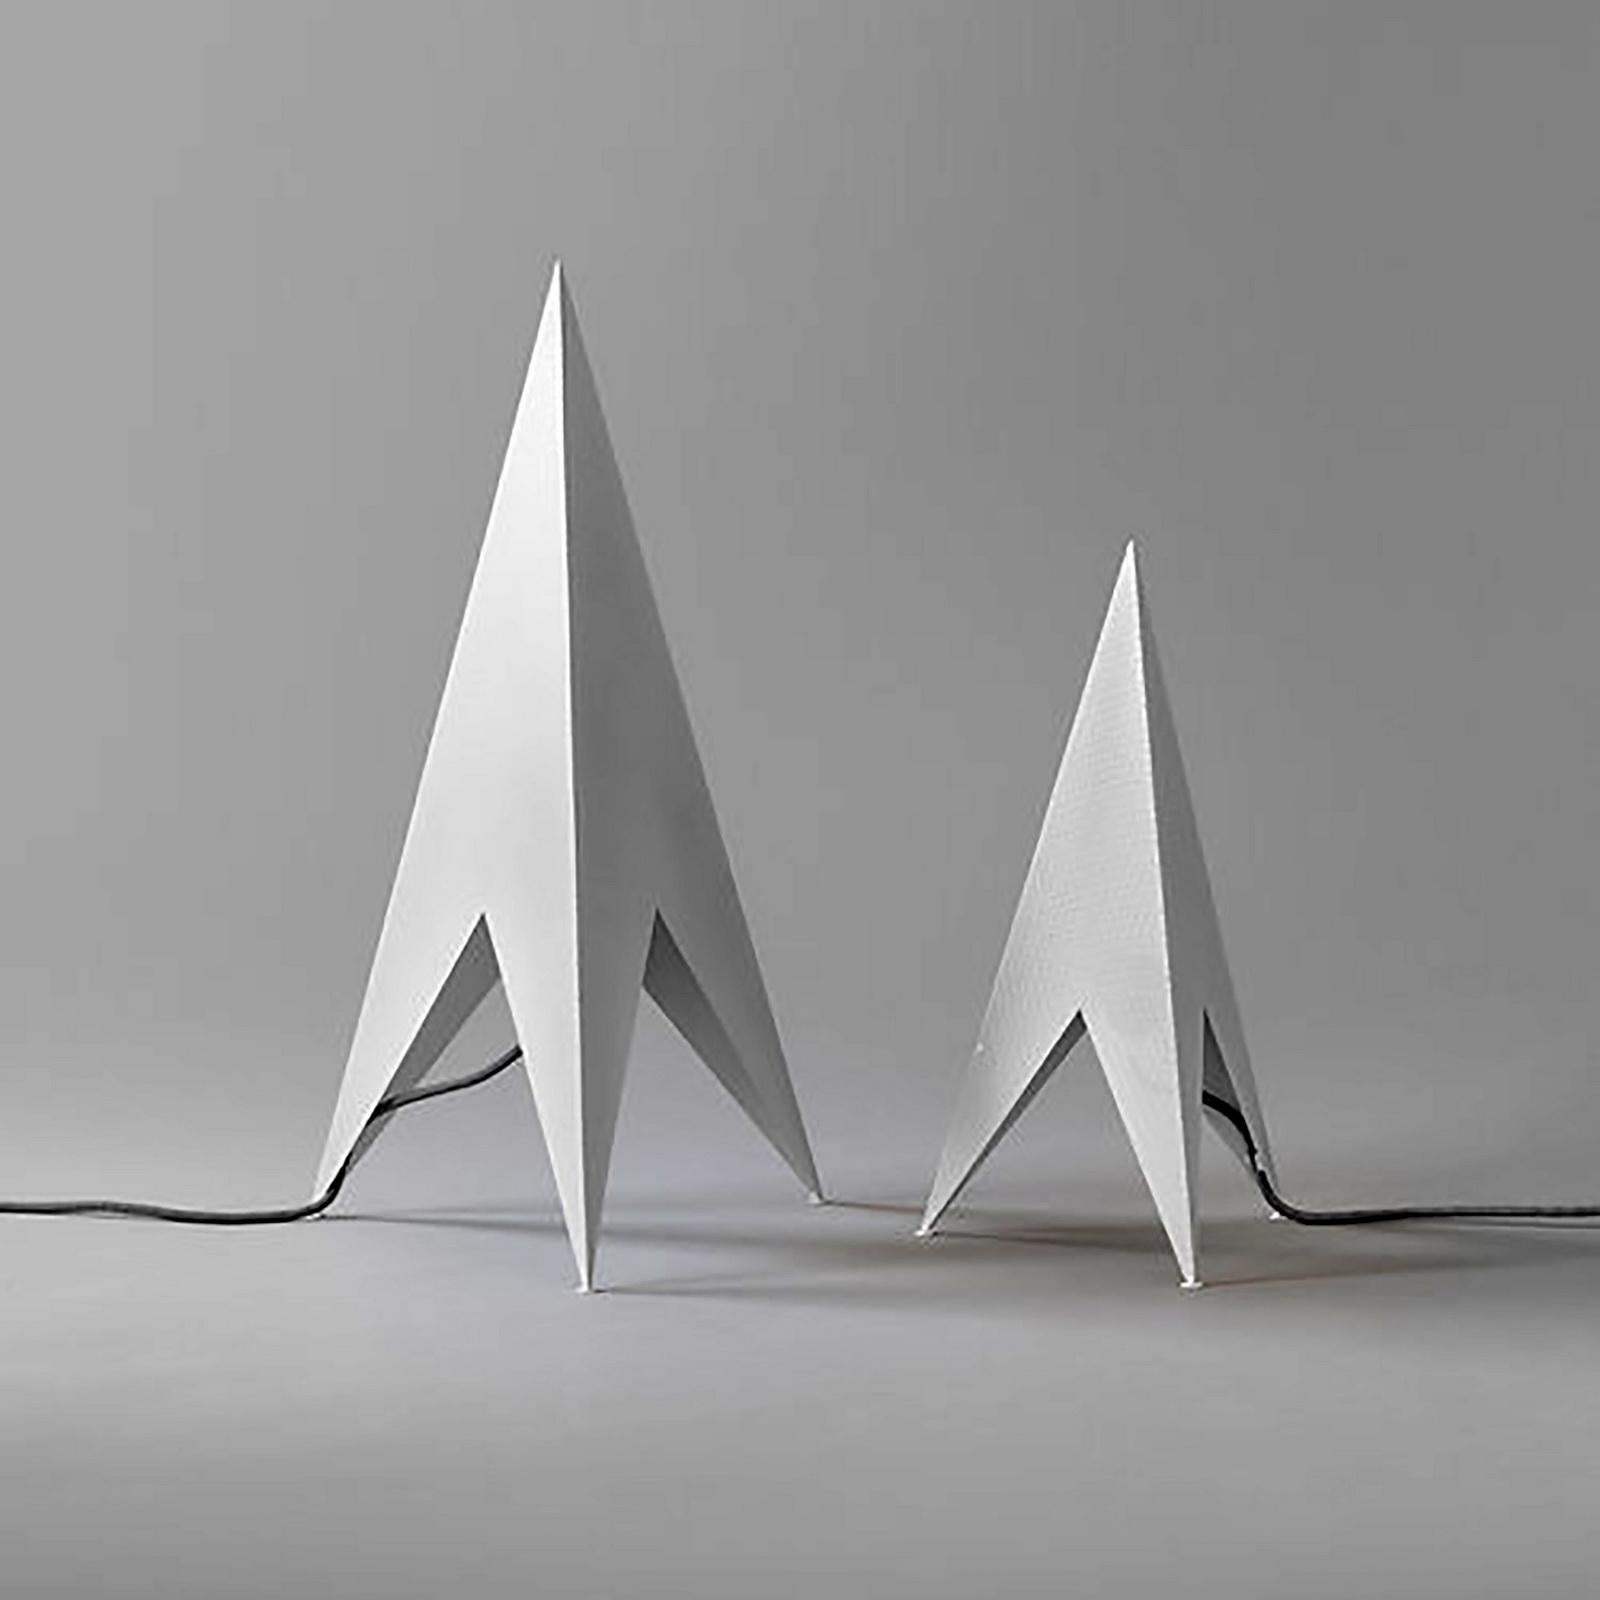 Elegant shape, the Rocket lamp was designed by Jangir Maddadi for Royal Design, Sweden, 2013.
This is the larger version and another two smaller pieces (20 in) are available; check our other listings.
Produced in a limited edition, nowadays, it is